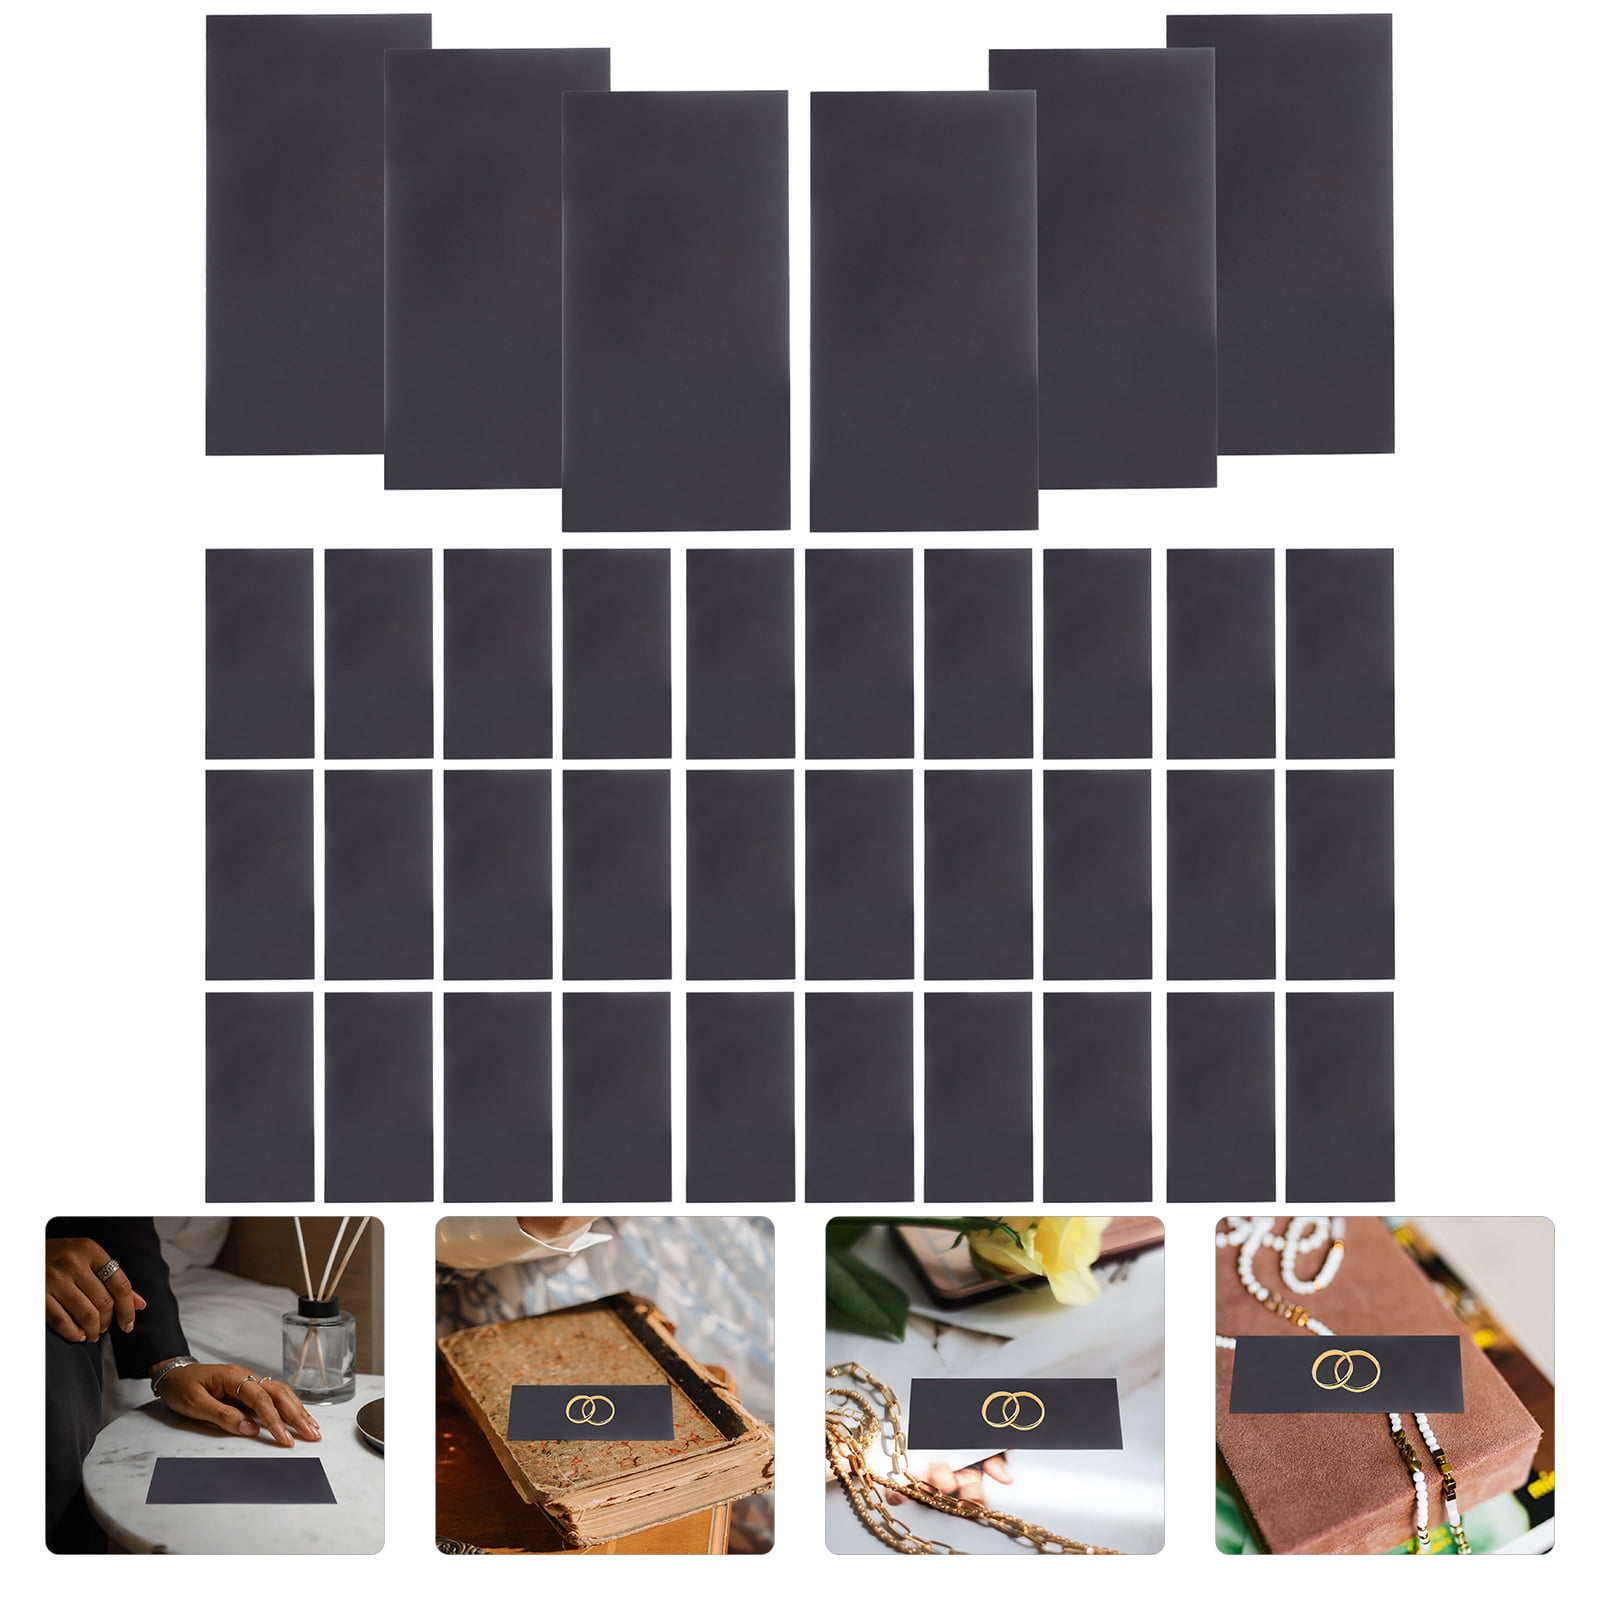 Anti Tarnish Strips Paper Tabs: Jewelry Tarnish Protector Square Black  100pcs for Jewelry Necklace Bracelet Earring Storage